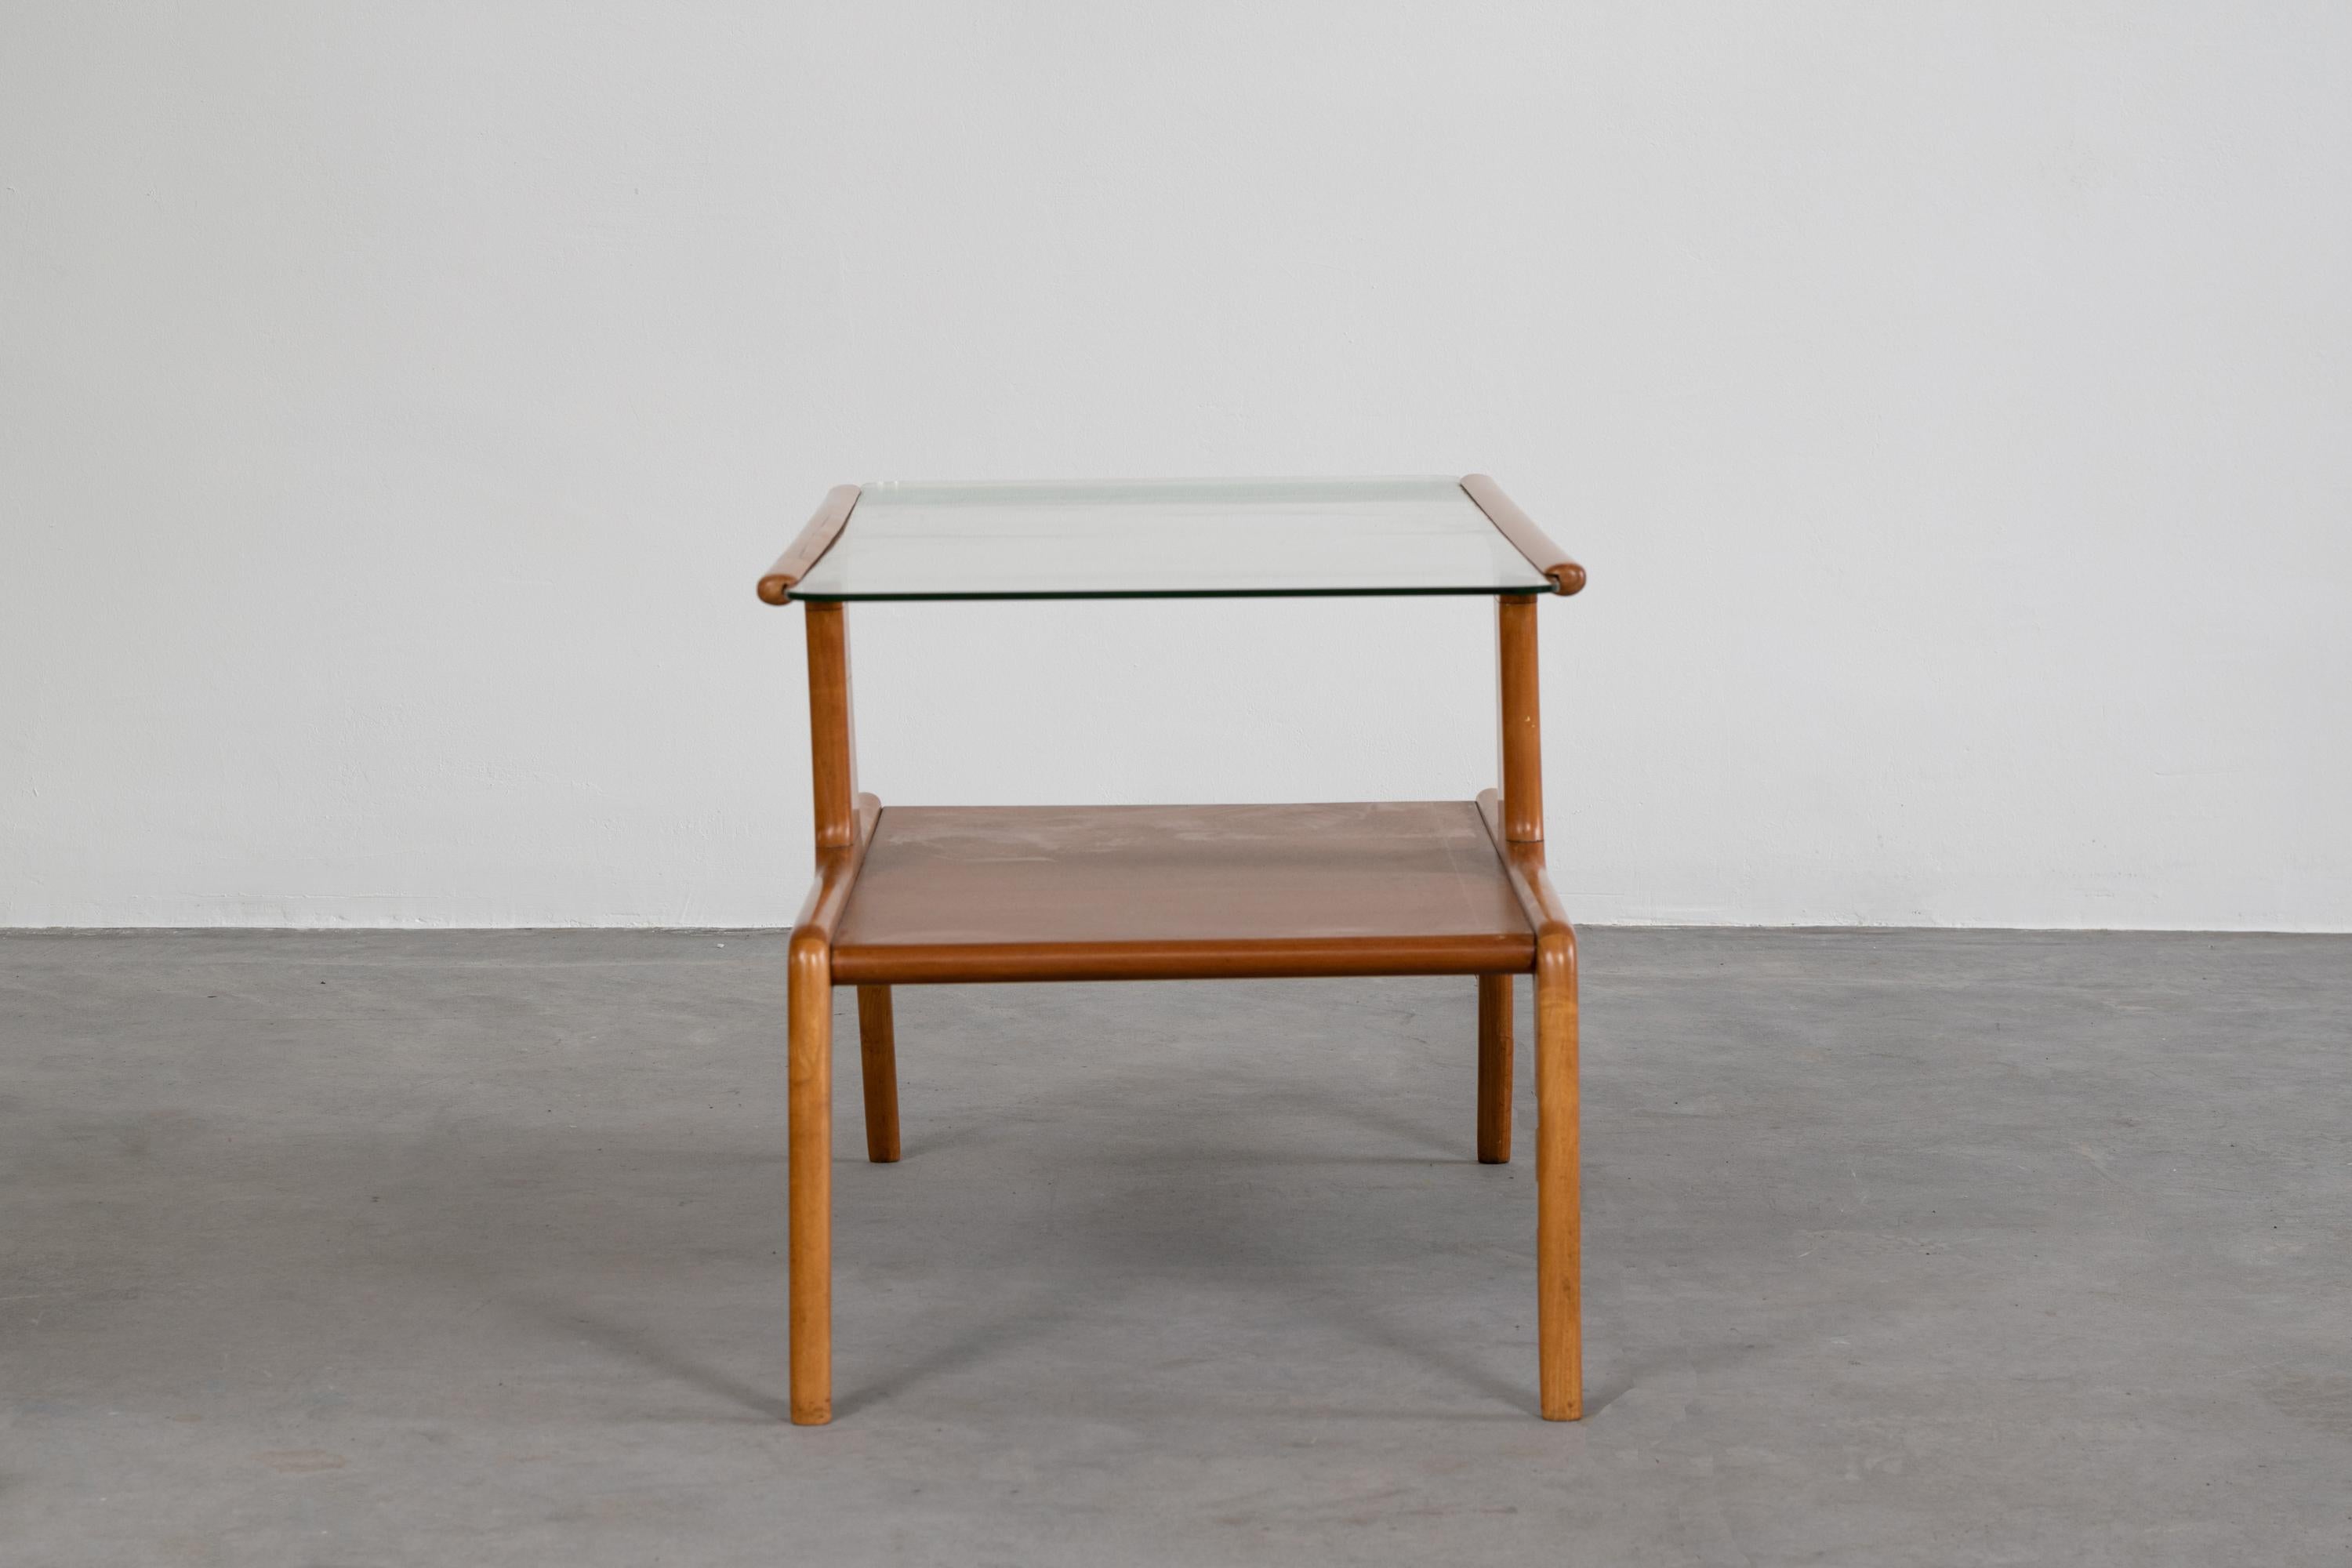 Mid-20th Century Gio Ponti Wooden and Crystal Coffee Table with Two Shelves from 1950s